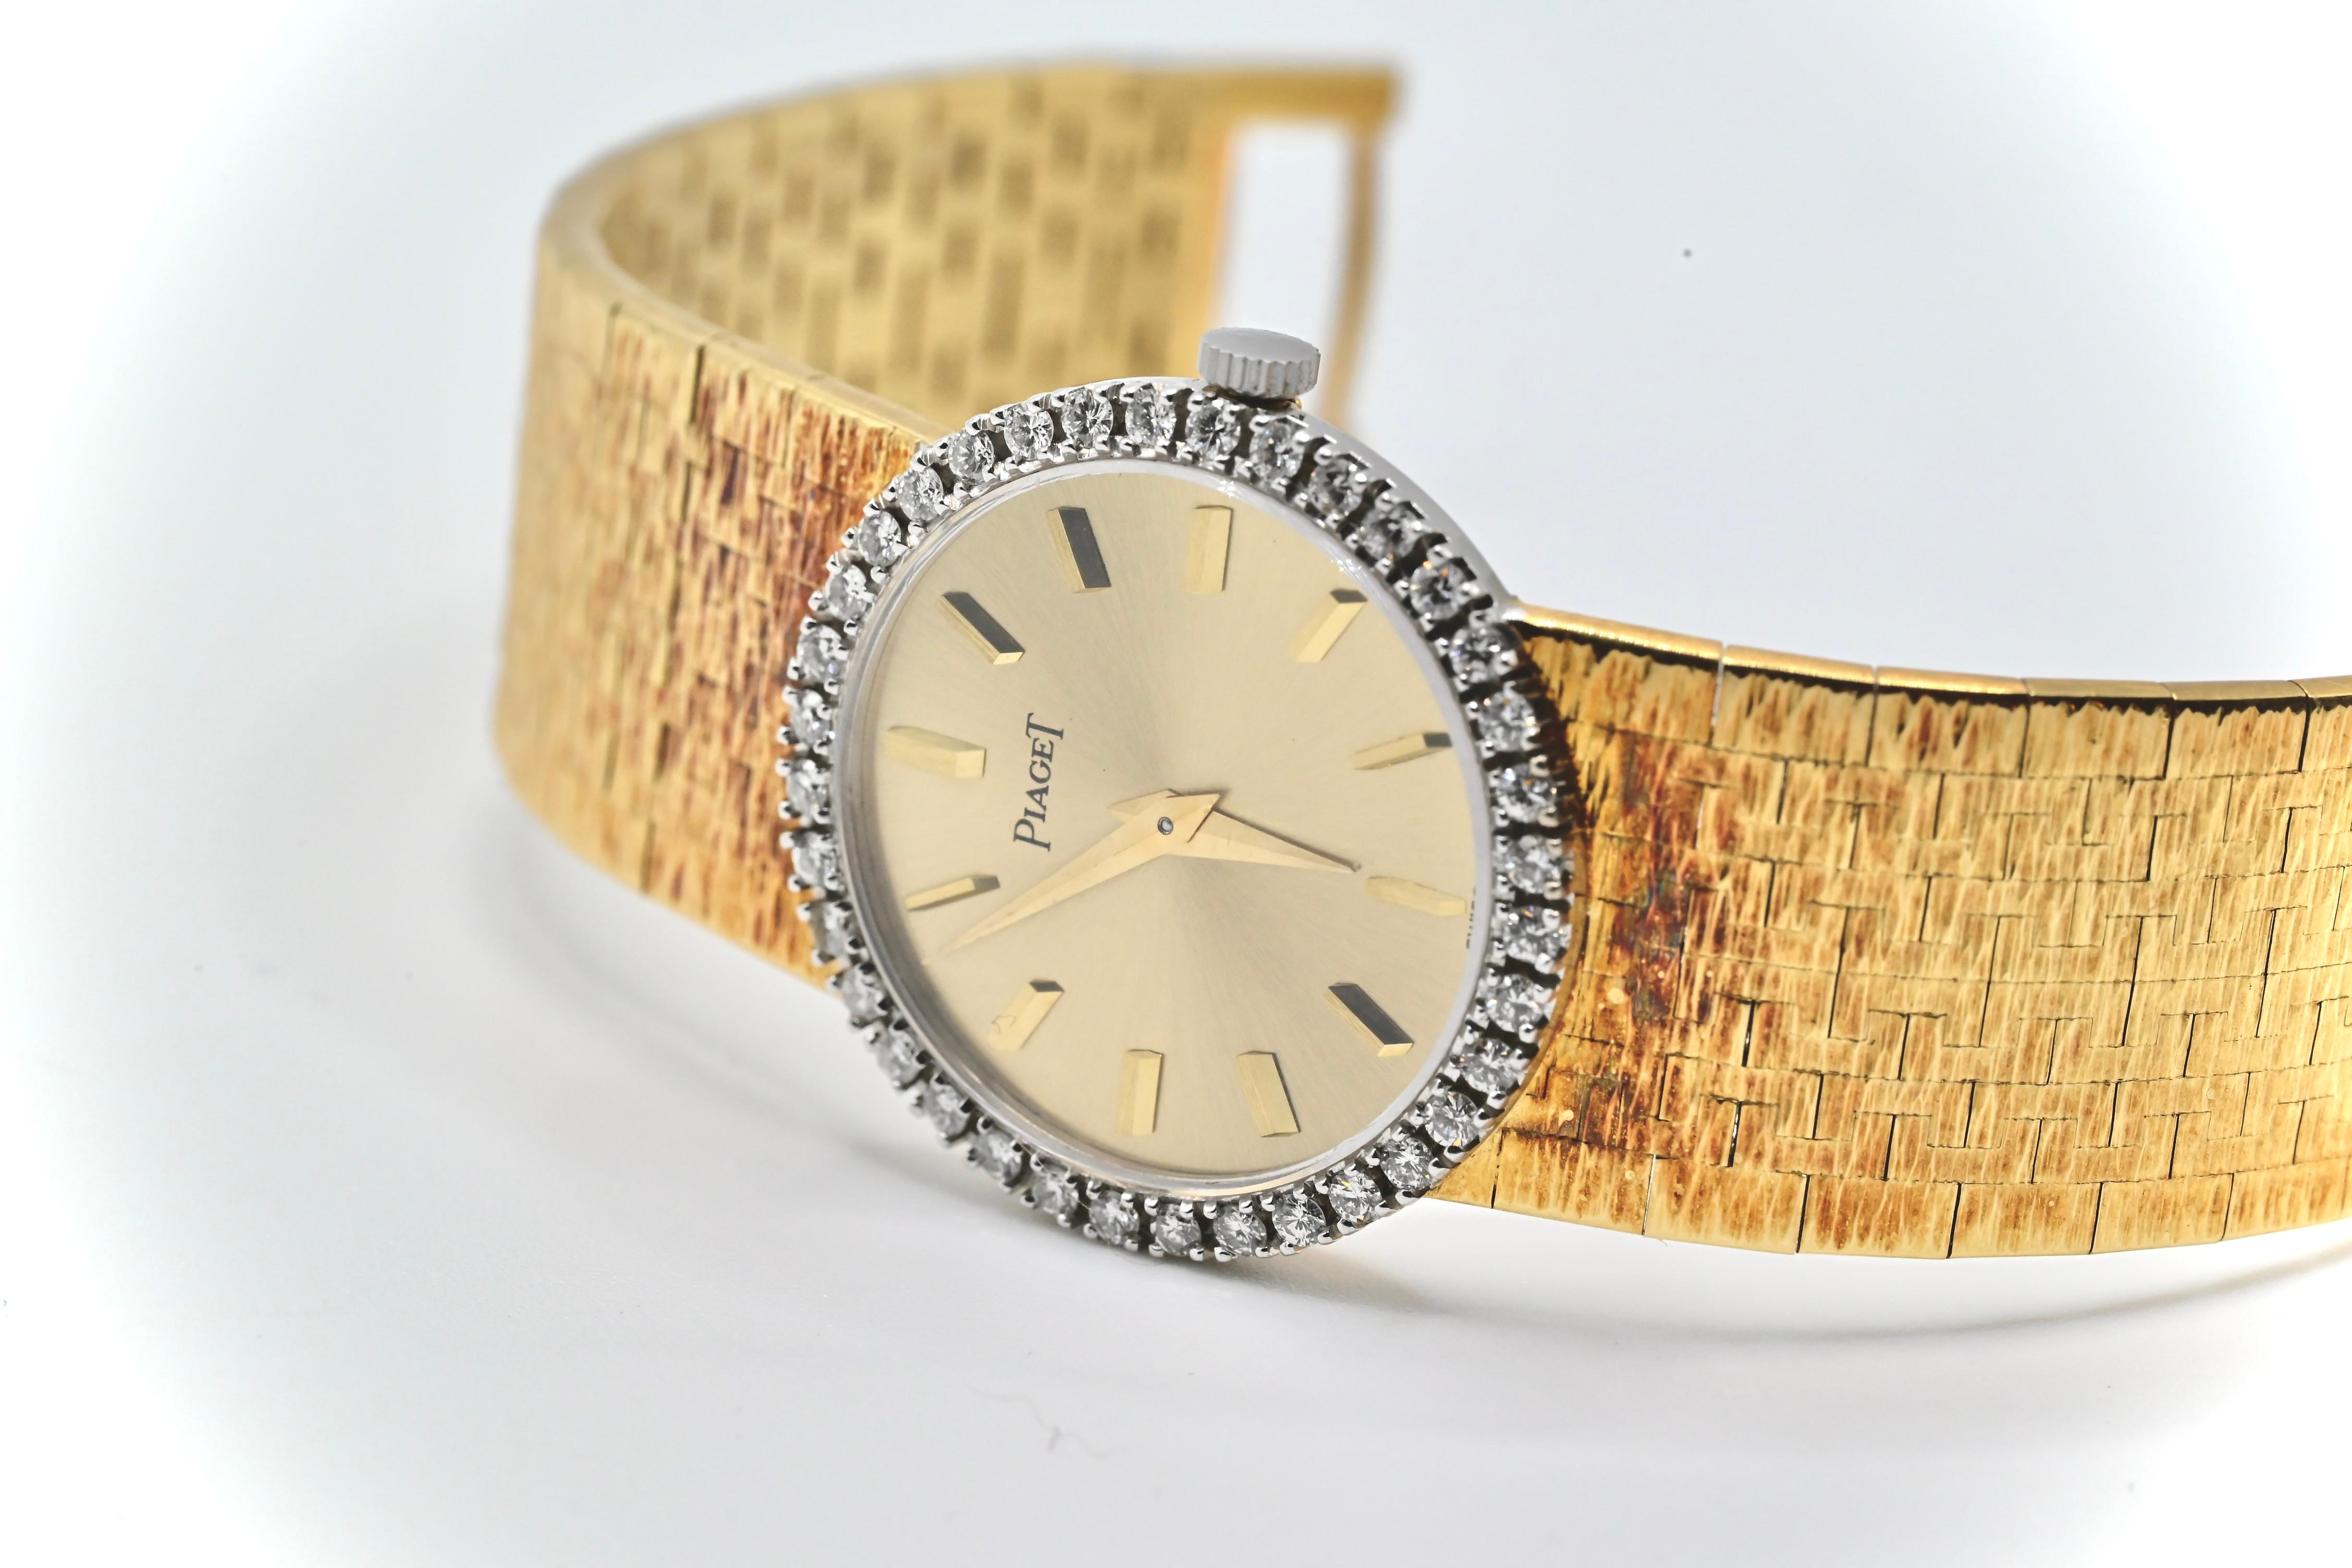 This is a beautiful classic Piaget ladies wristwatch made with 18k yellow gold and diamonds. It has a count of 36 exceptional round diamonds encrusted on the bezel of the watch. The case diameter is 24mm, and the strap length is approximately 6